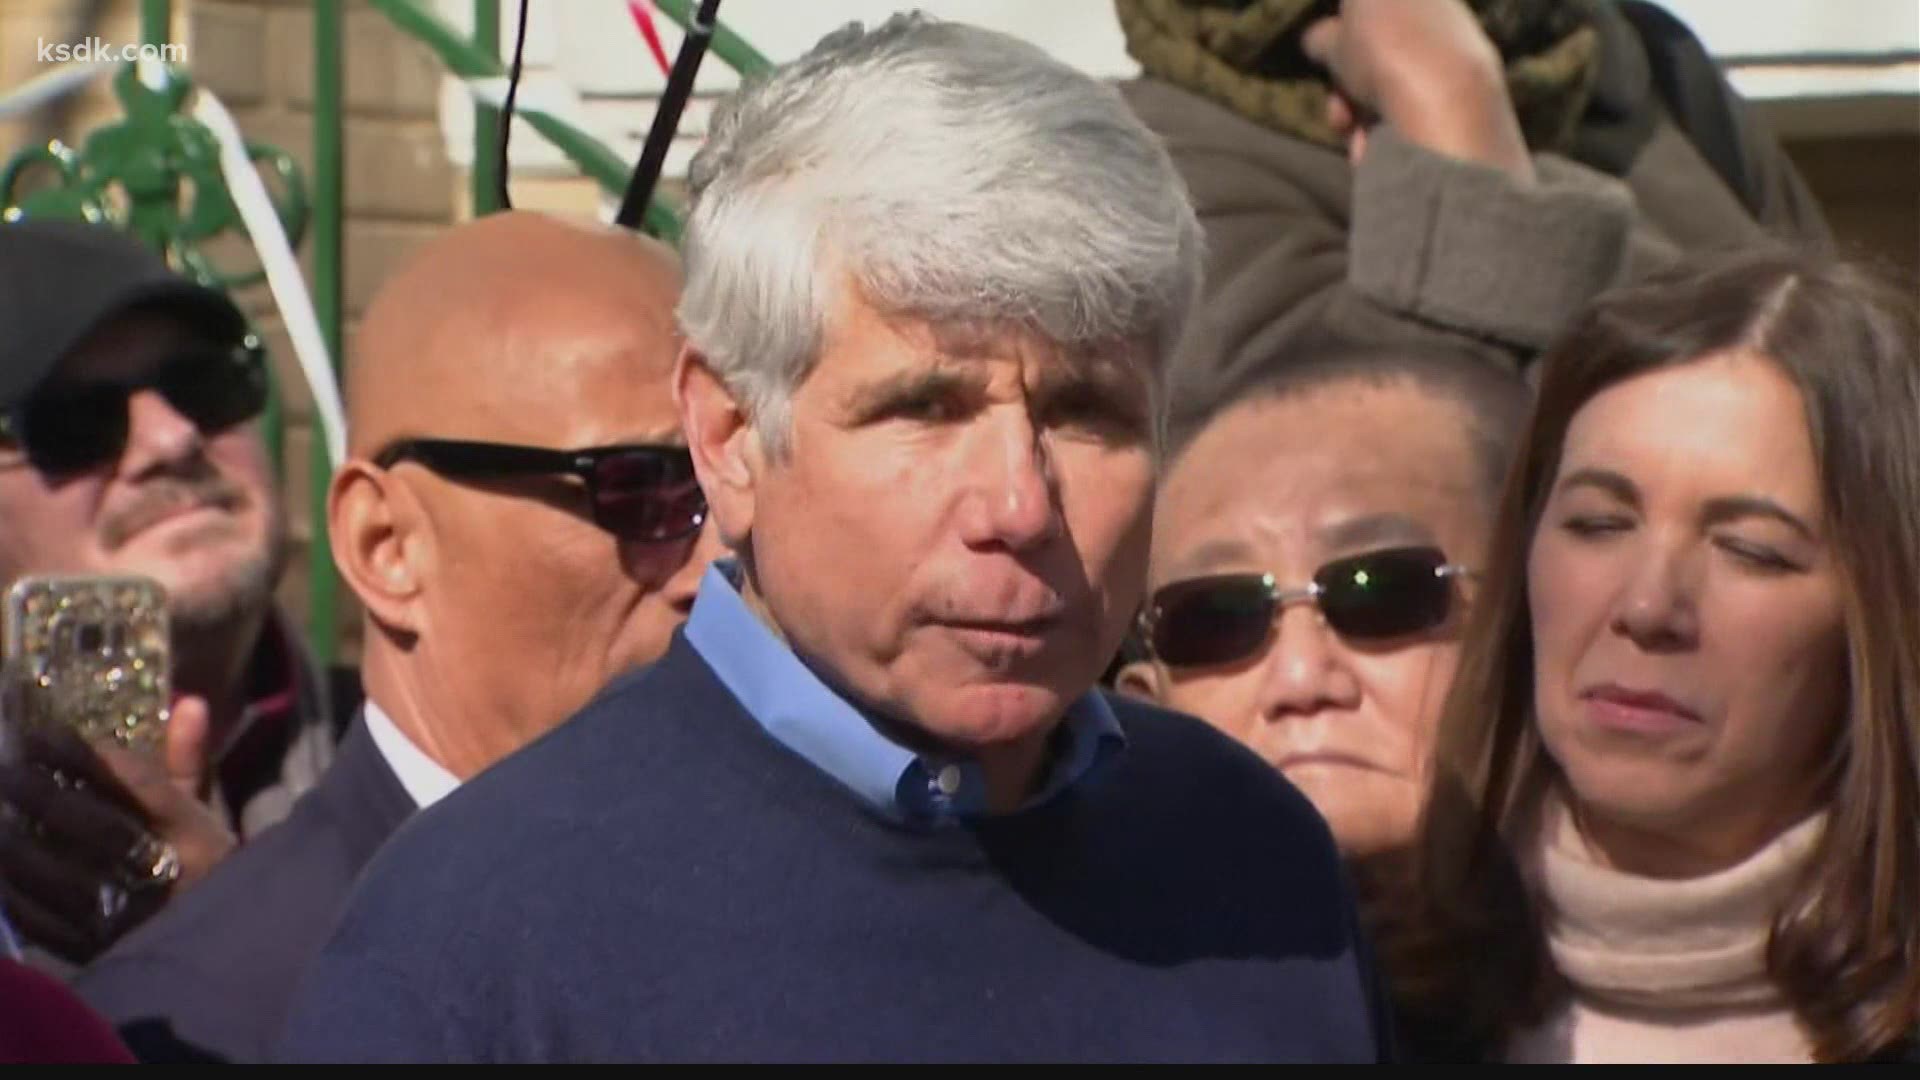 Since his release from the federal prison camp in Littleton, Colorado, Blagojevich has earned money by making videos on Cameo